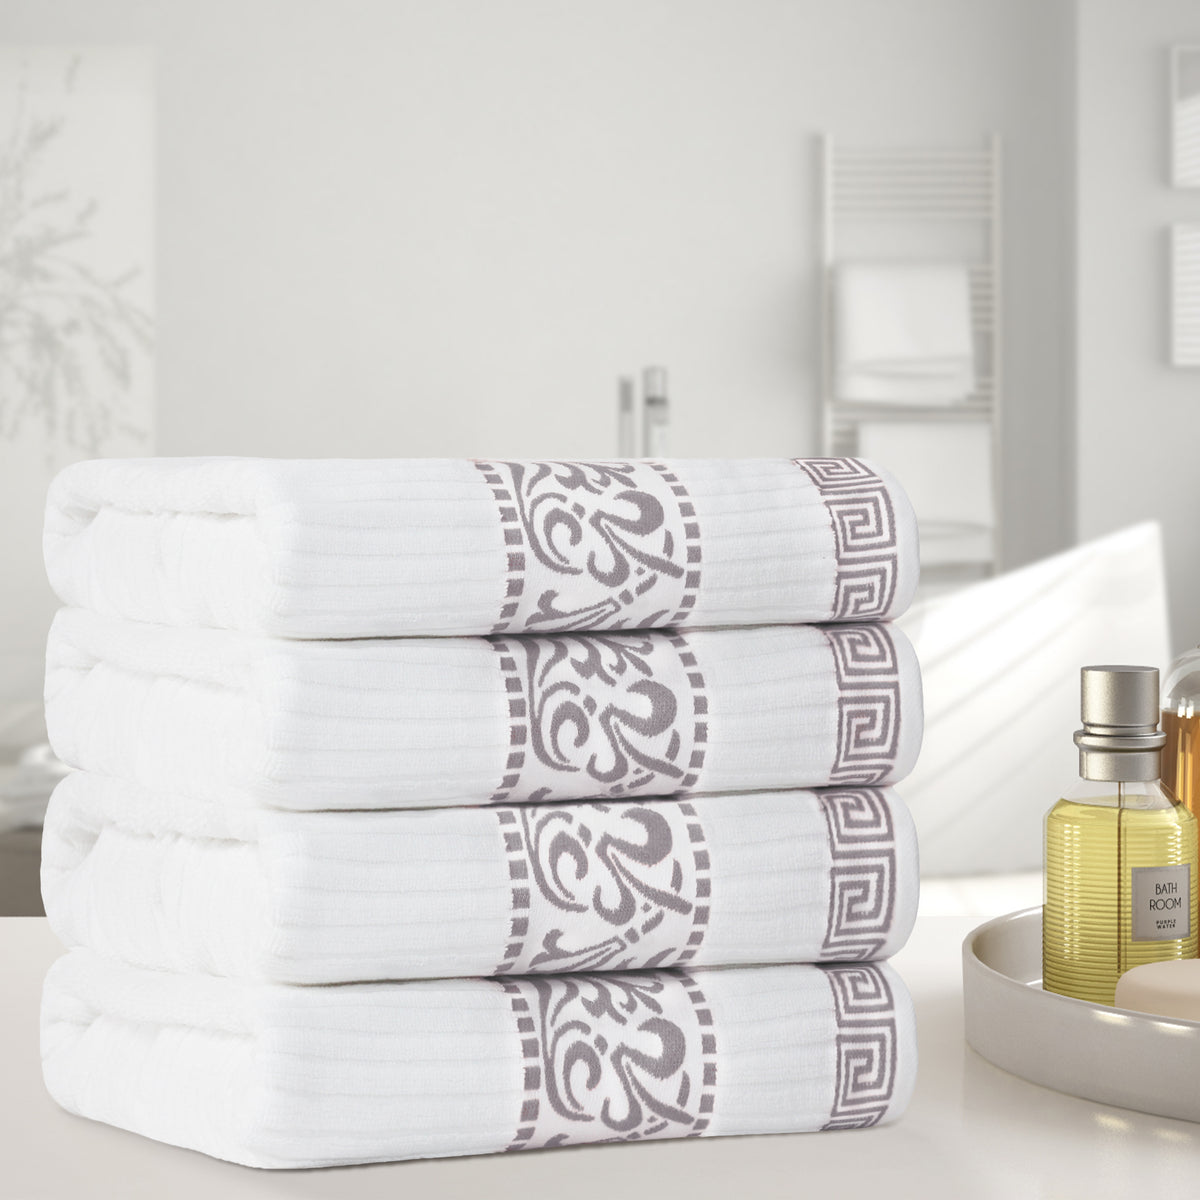 Superior Athens Cotton 4-Piece Bath Towel Set with Greek Scroll and Floral Pattern - White-Chrome